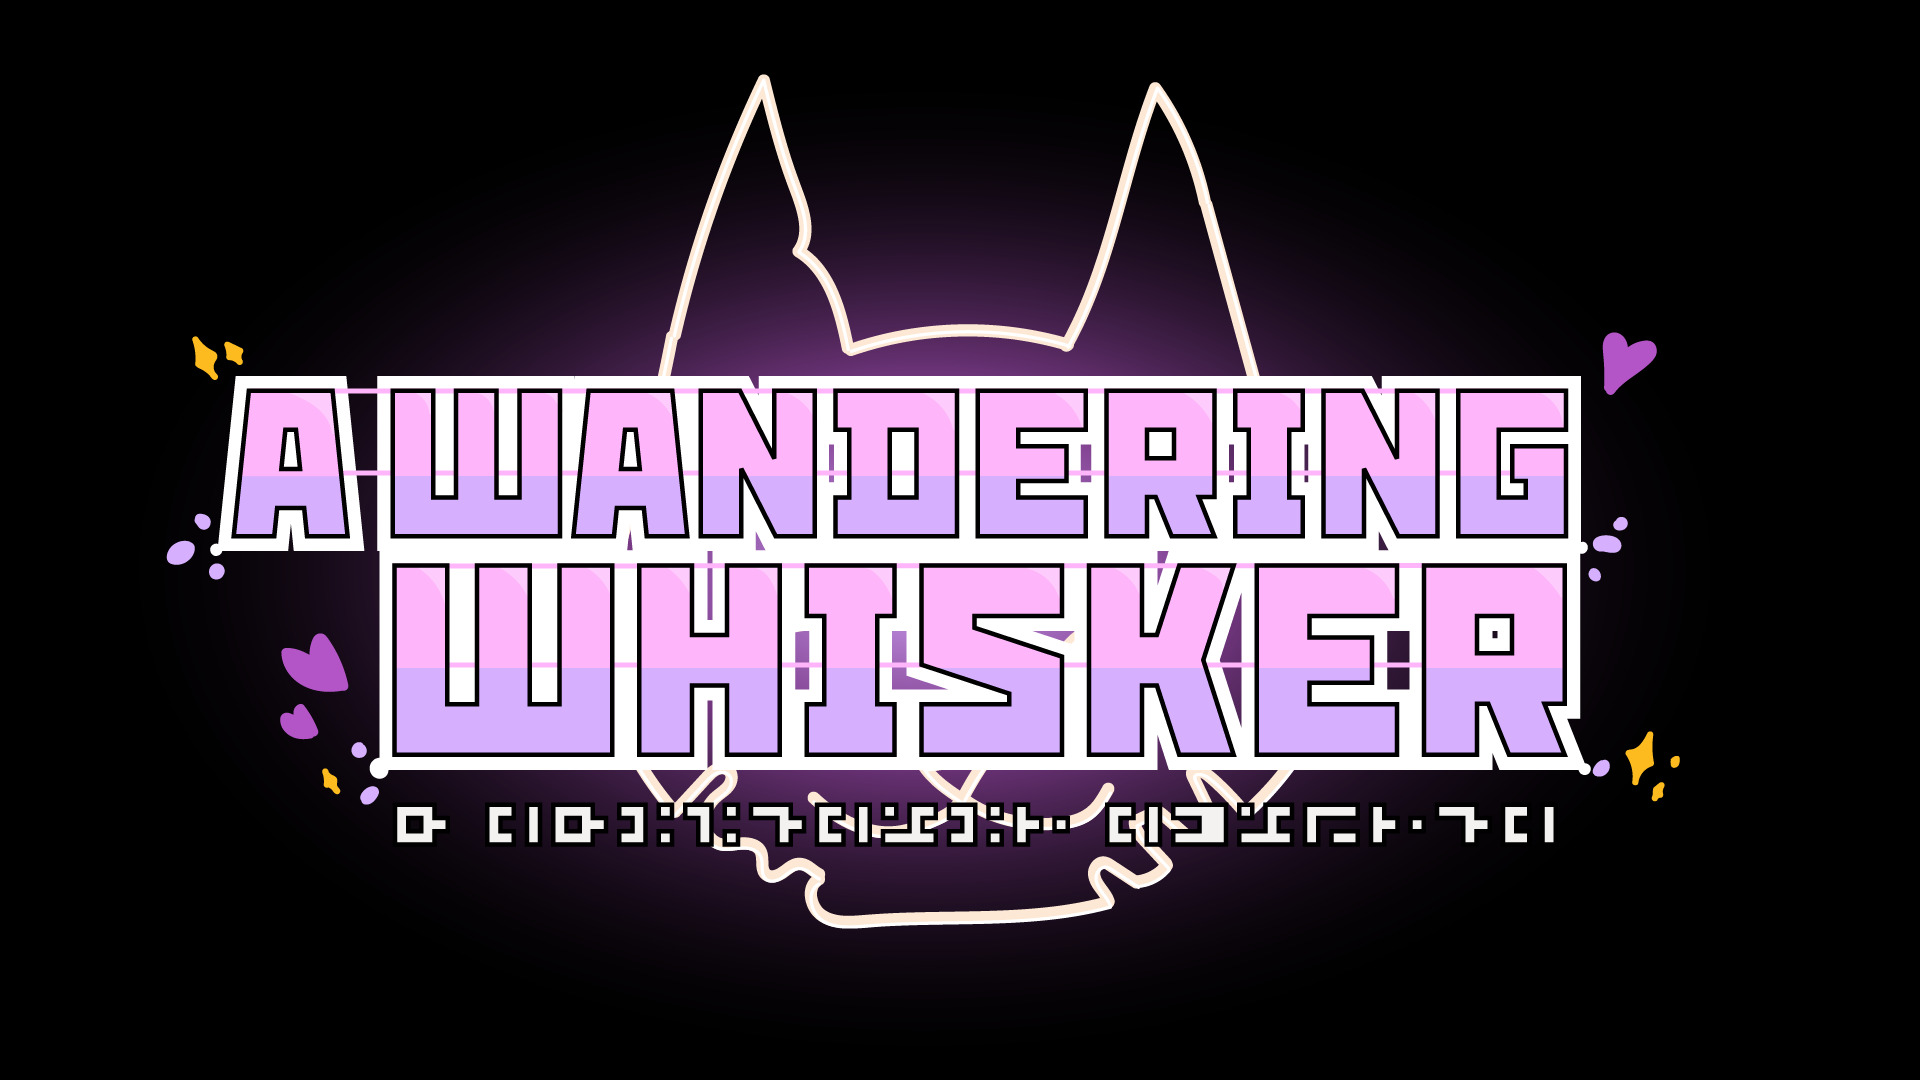 A Wandering Whisker - Early Prototype